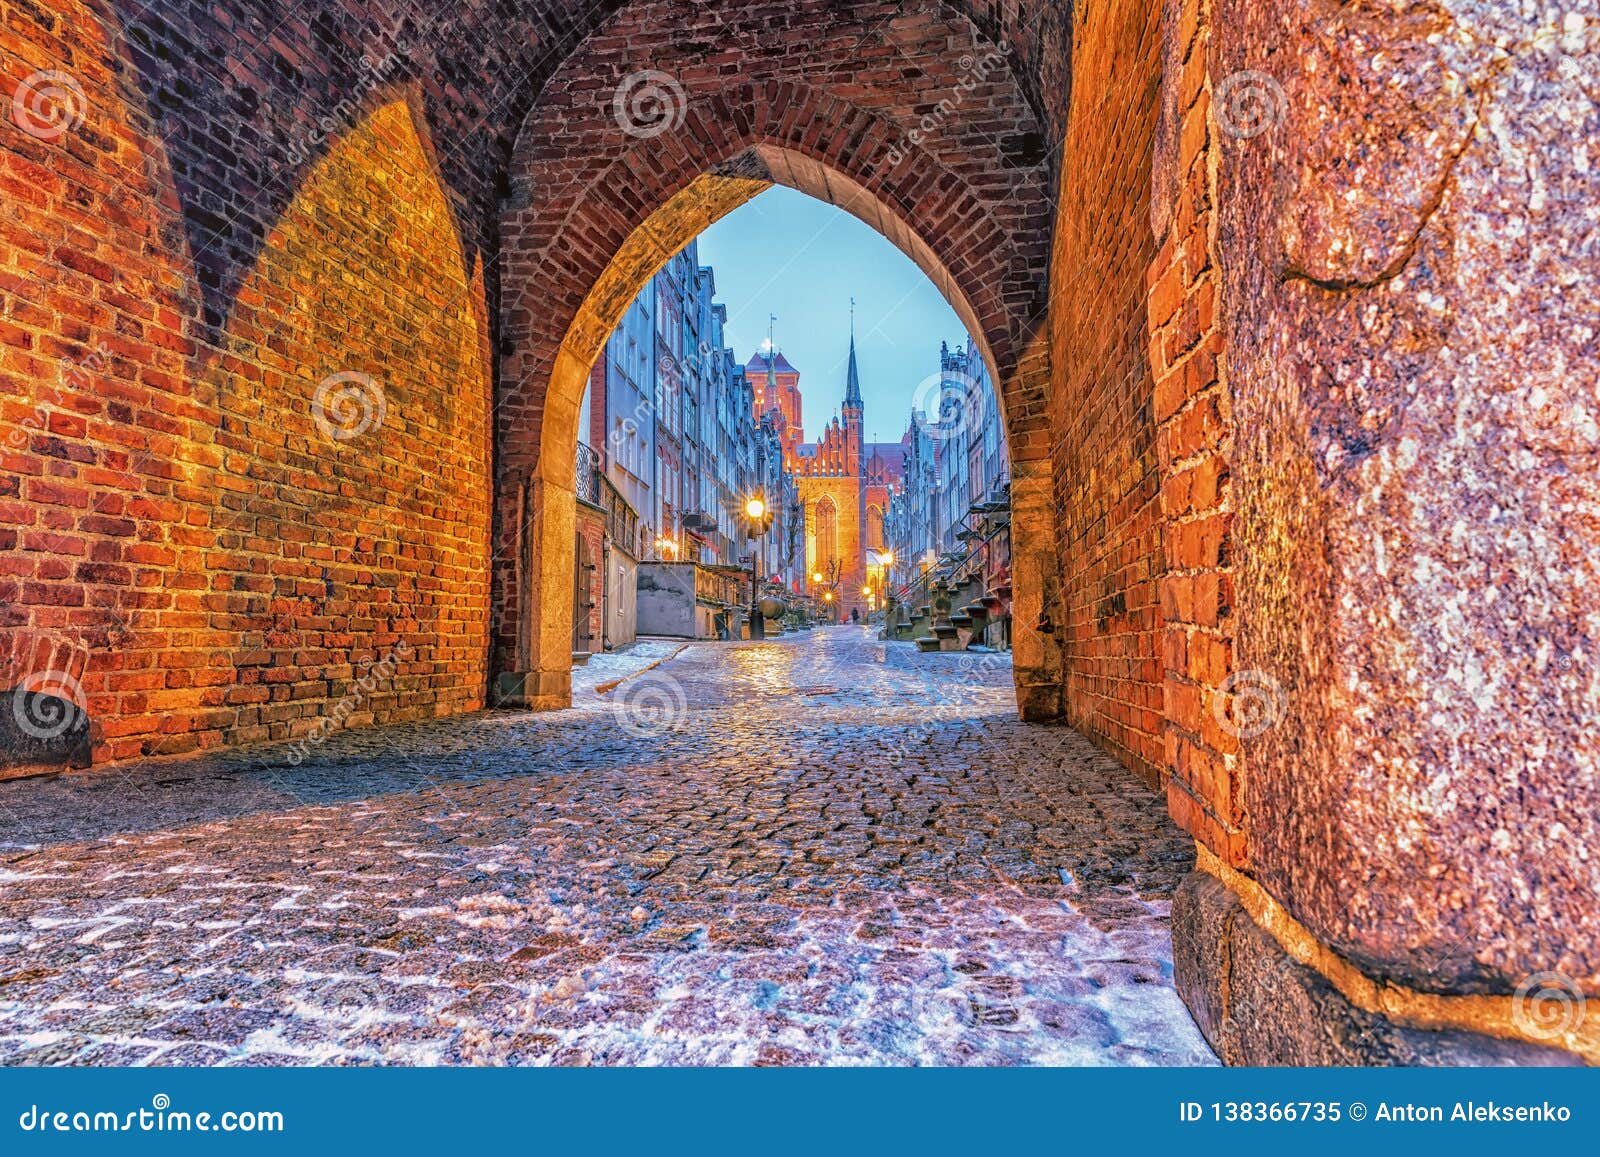 mariacka gate and the street in gdansk, old town, poland